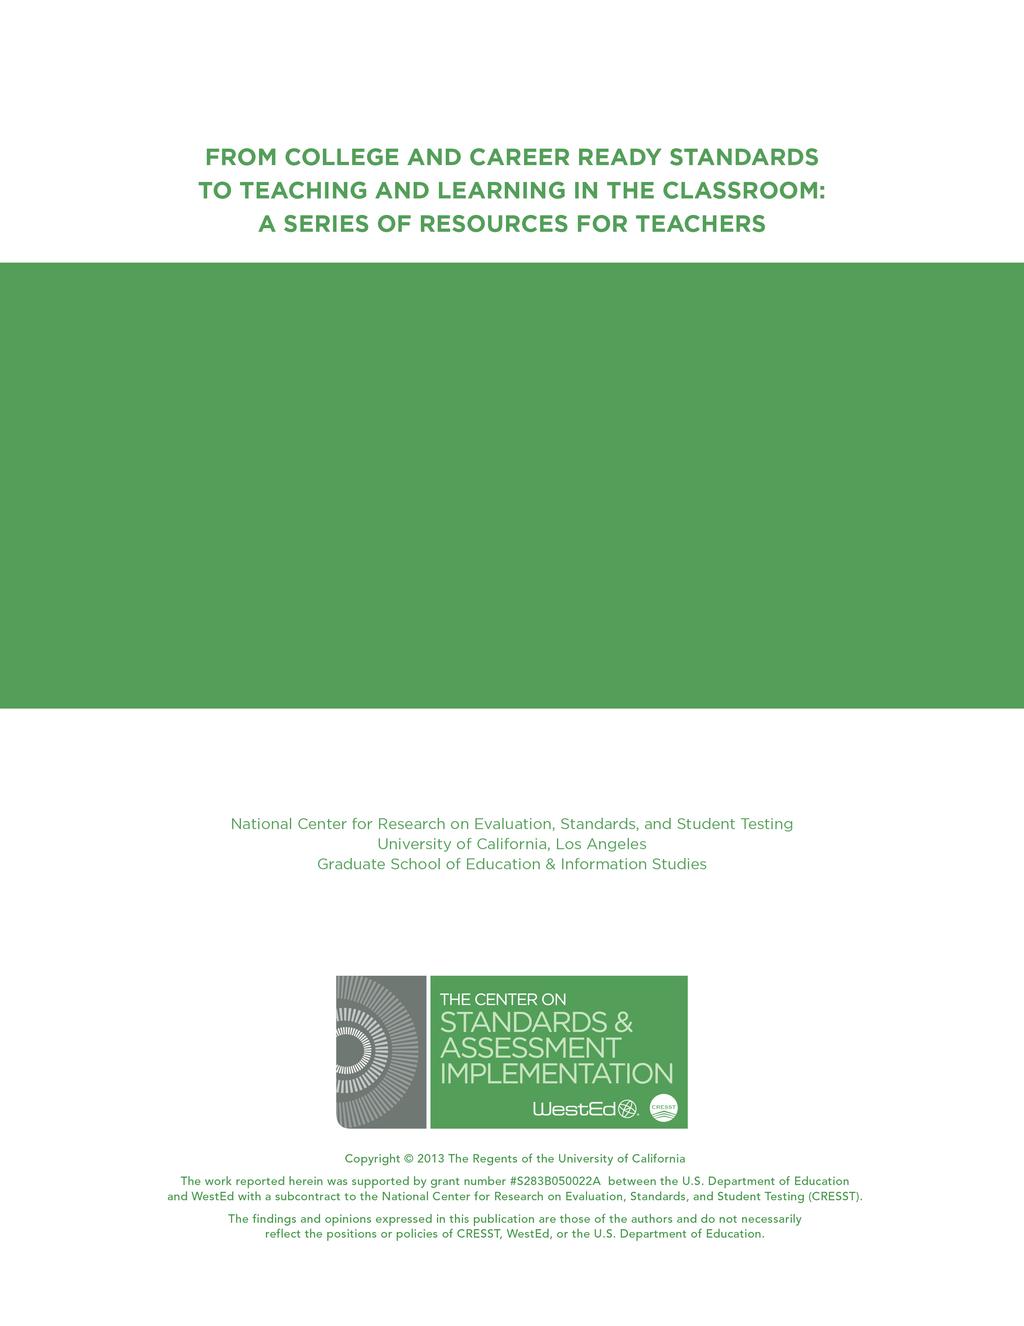 Pilot Version DRAFT Developing and Refining Lessons: Planning Learning and Formative Assessment for College and Career Ready Standards Authors: Glory Tobiason,